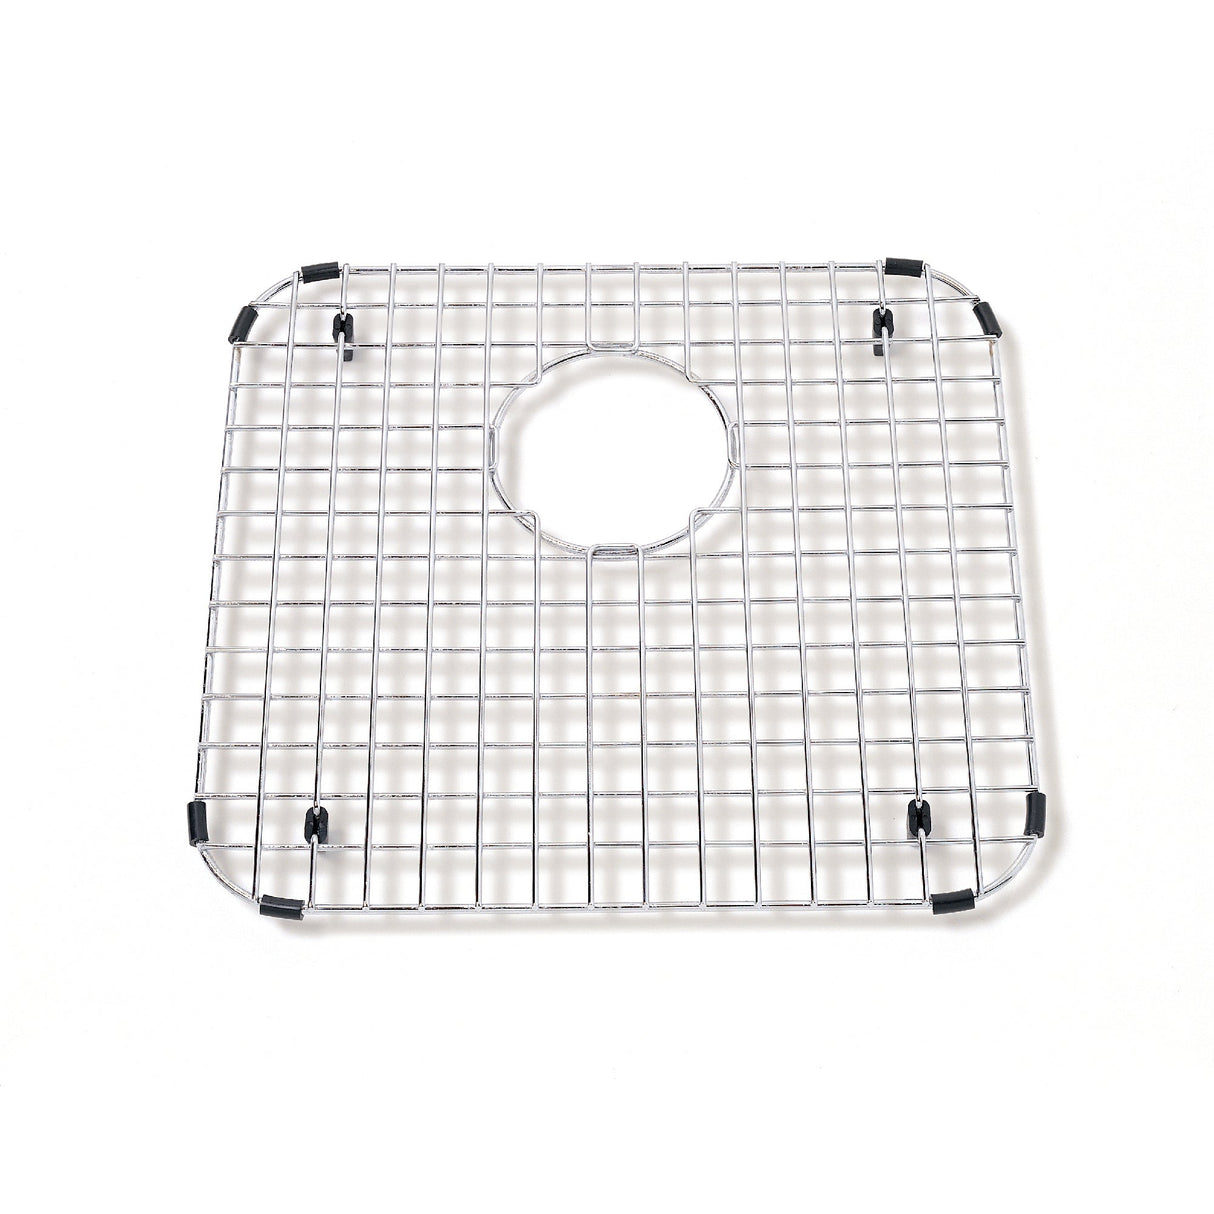 KINDRED BG11S Stainless Steel Bottom Grid for Sink 14.25-in x 15.25-in In Stainless Steel